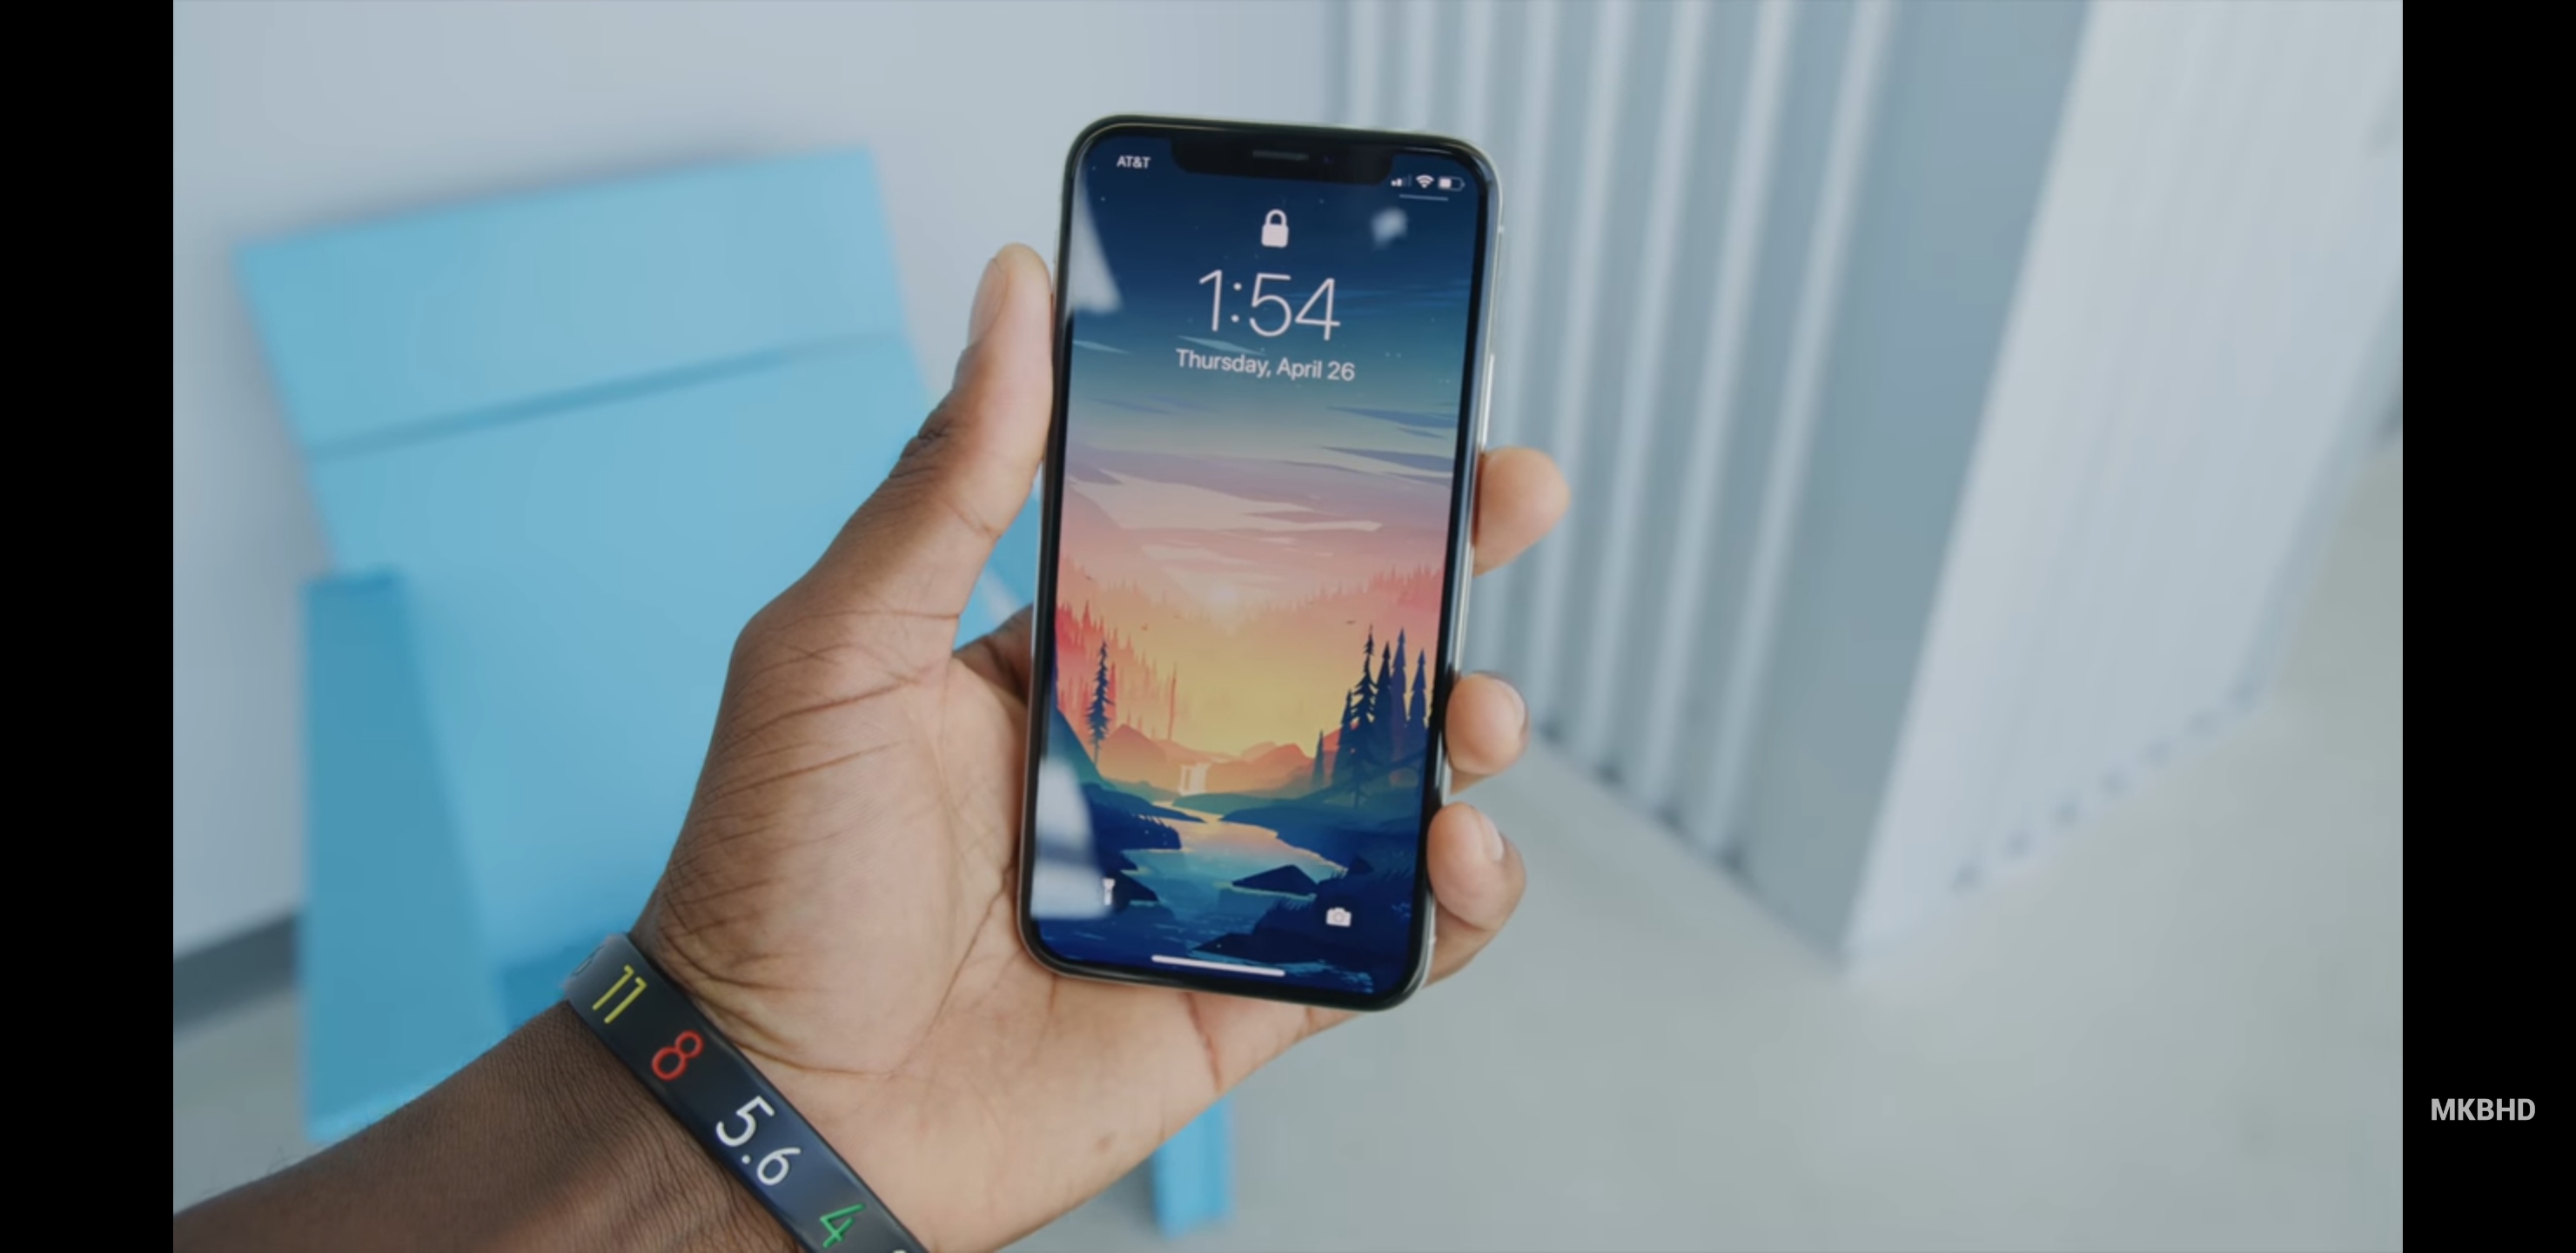 Trying To Find This Wallpaper From The iPhone X Revisited Video